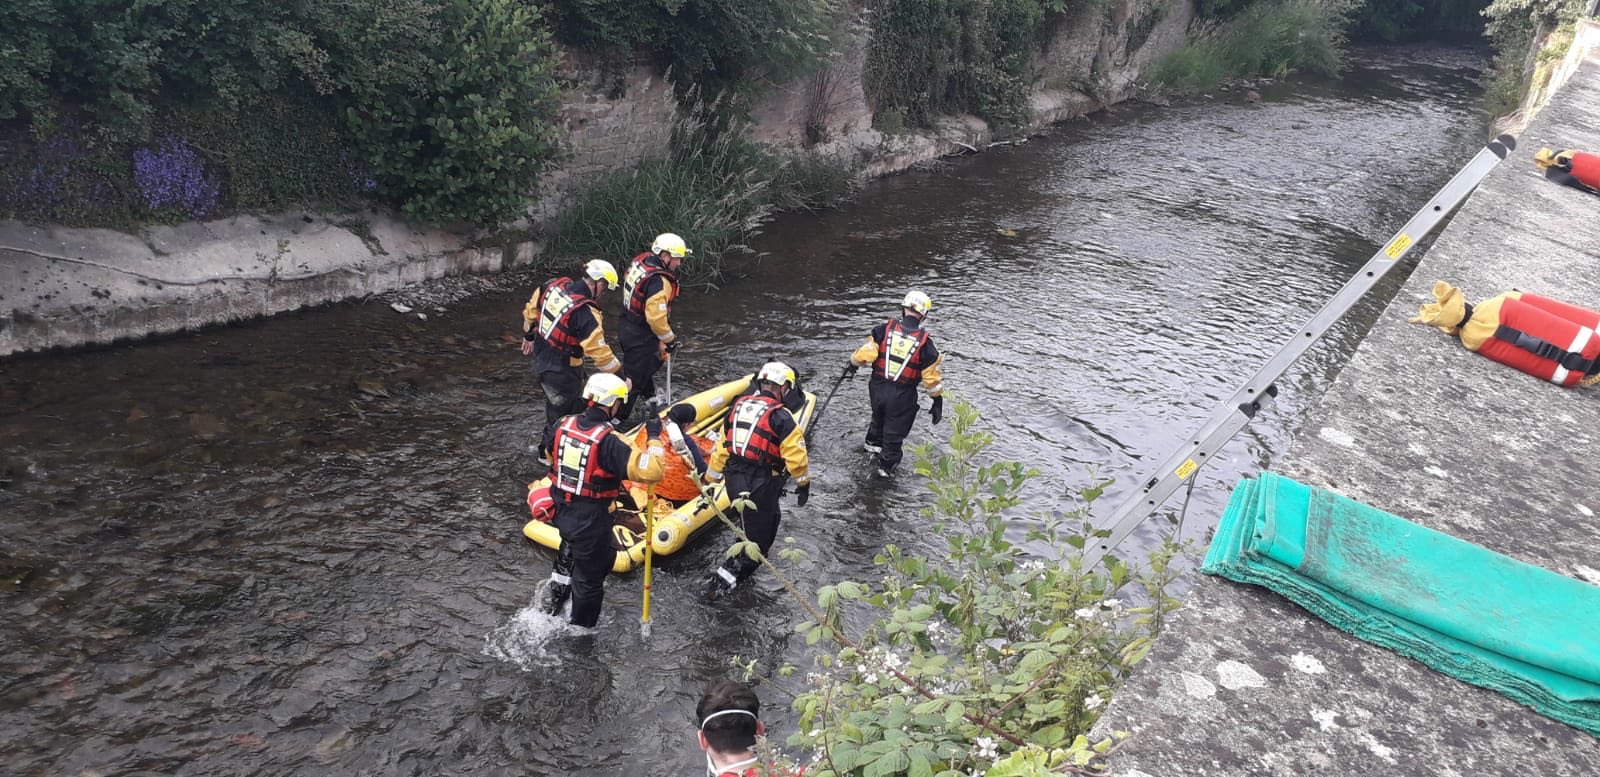 NEWS | Fire crews rescue person from river in Leominster